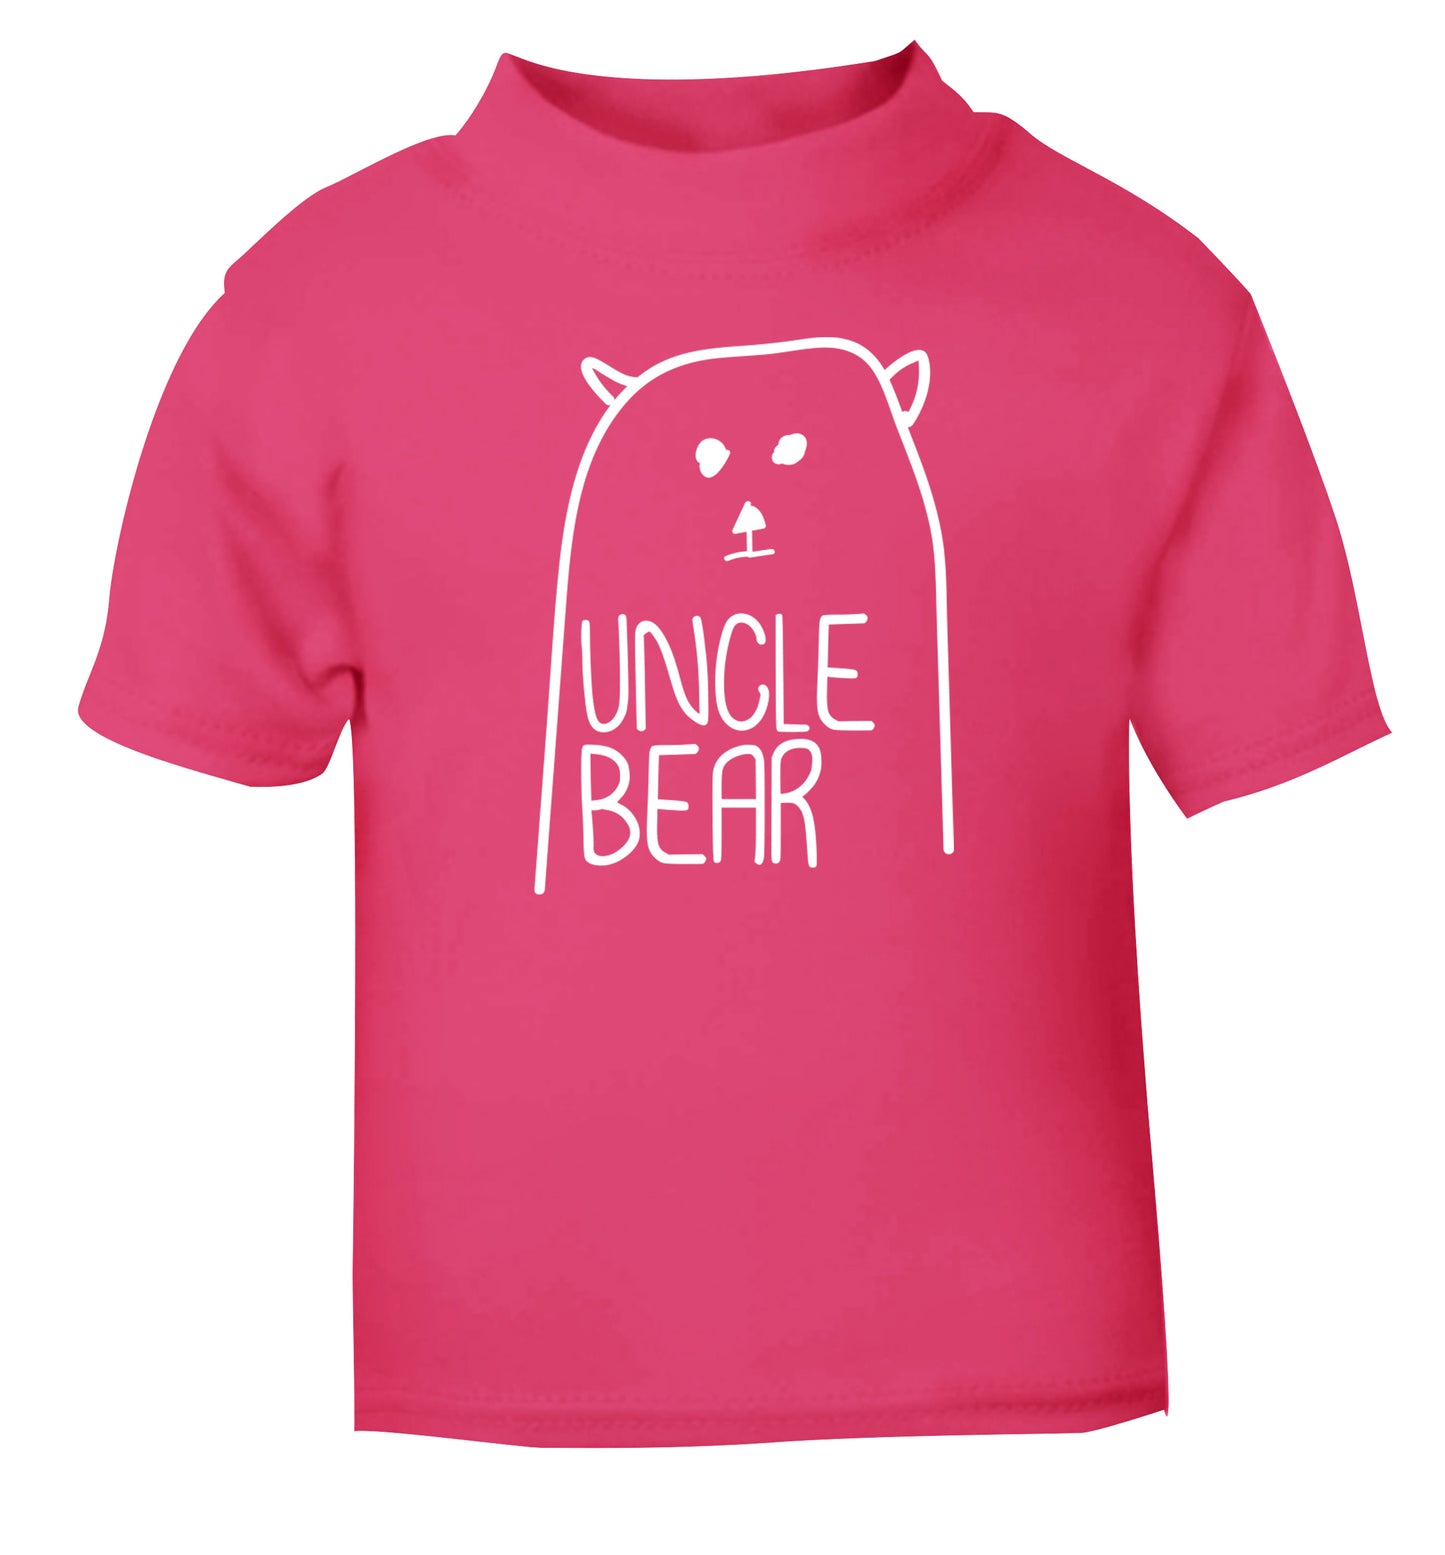 Uncle bear pink Baby Toddler Tshirt 2 Years